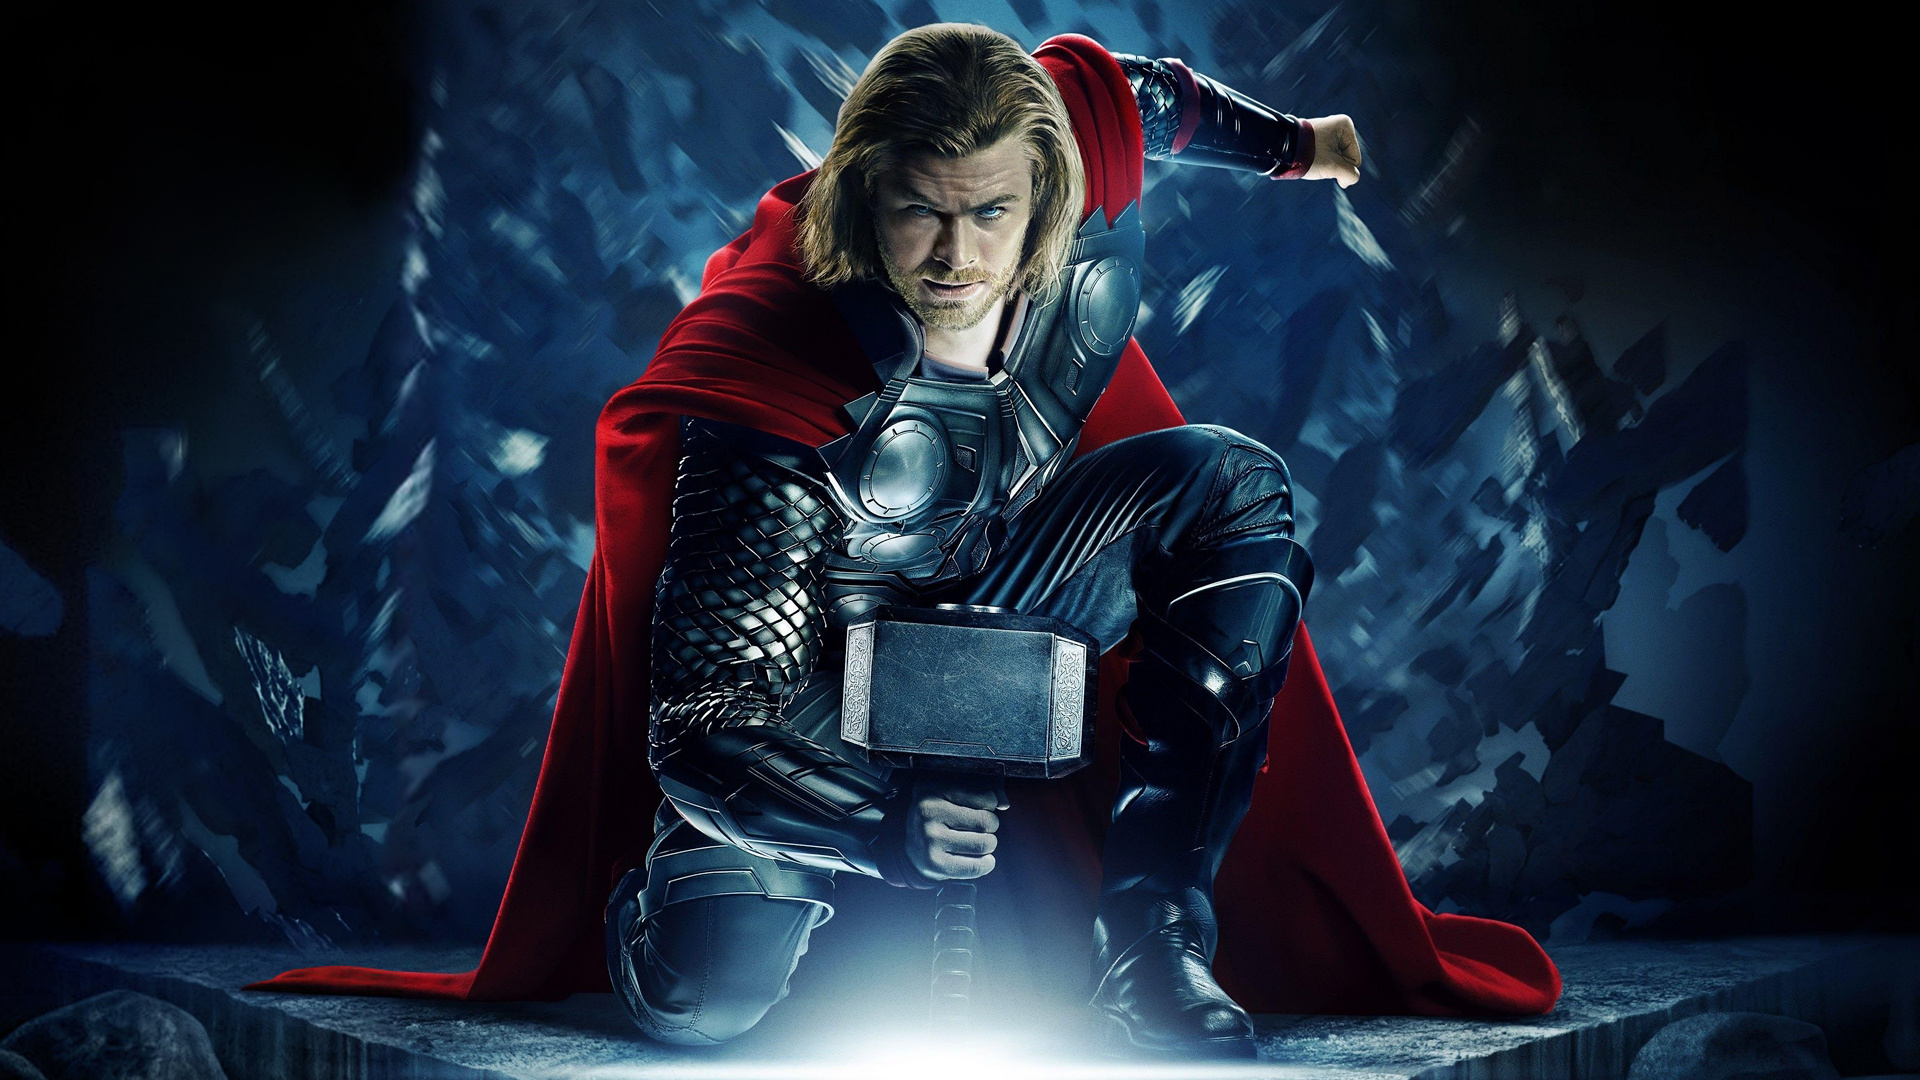 Thor Wallpaper HD Widescreen Attachment 4747 - HD Wallpapers Site